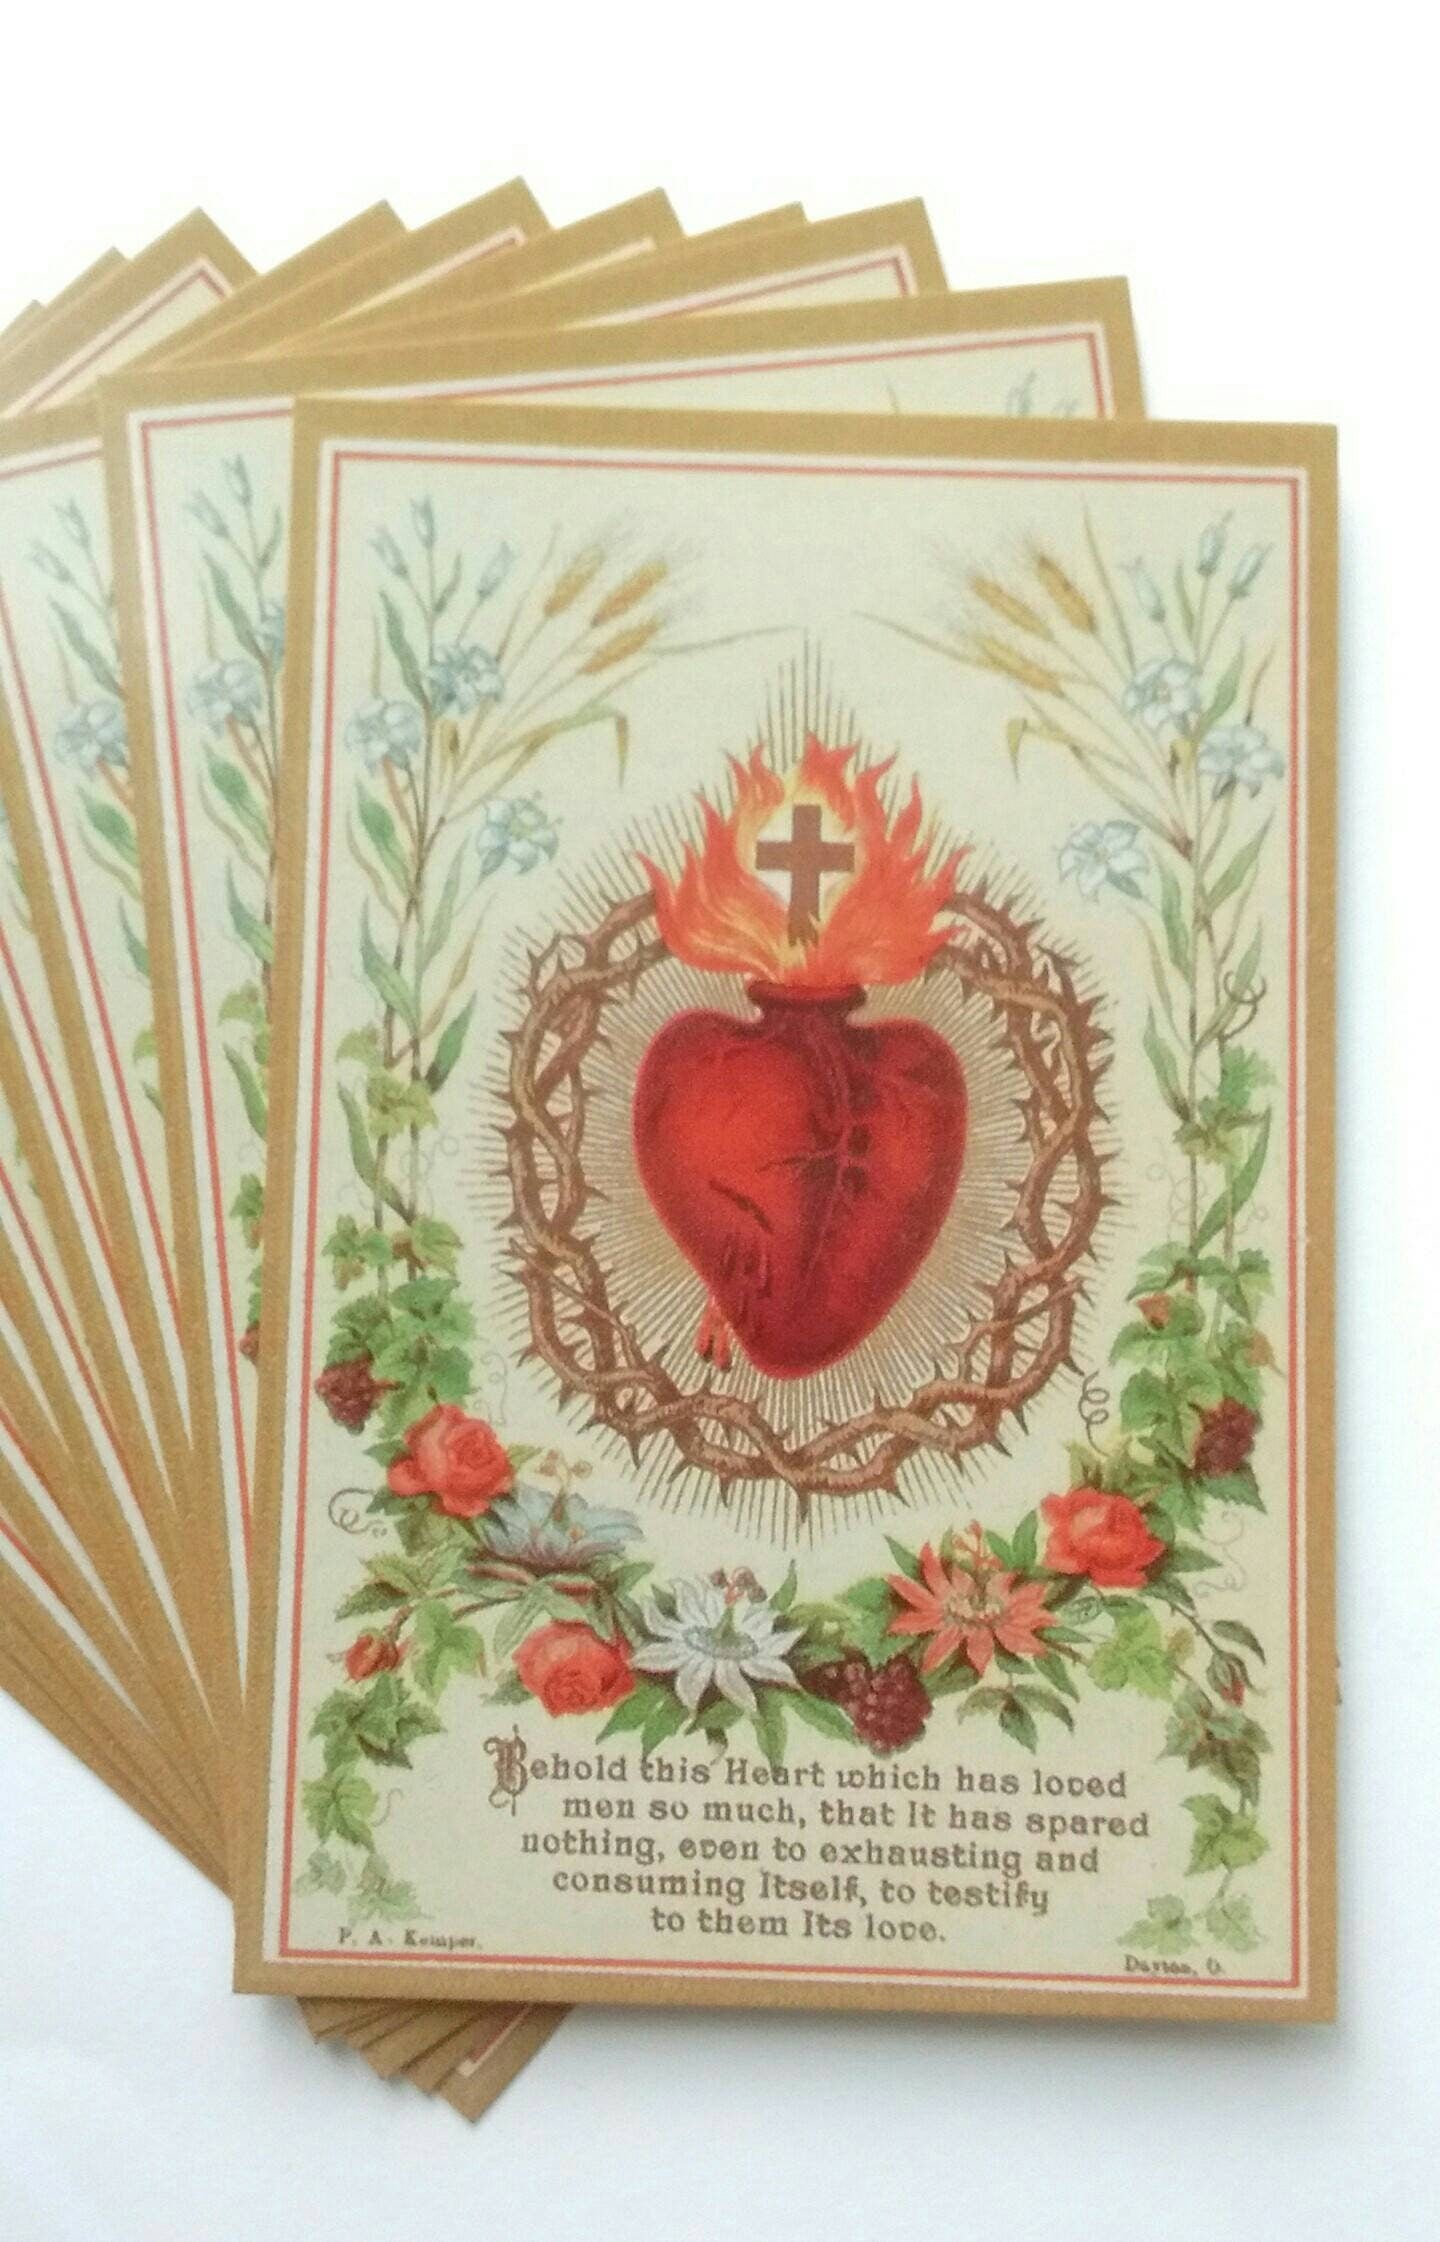 Sacred Heart of Jesus Postcard / 4x6 Holy Card – pack of 3, 10, 100, or 500 – based on a Vintage Holy Card – Victorian Catholic Art